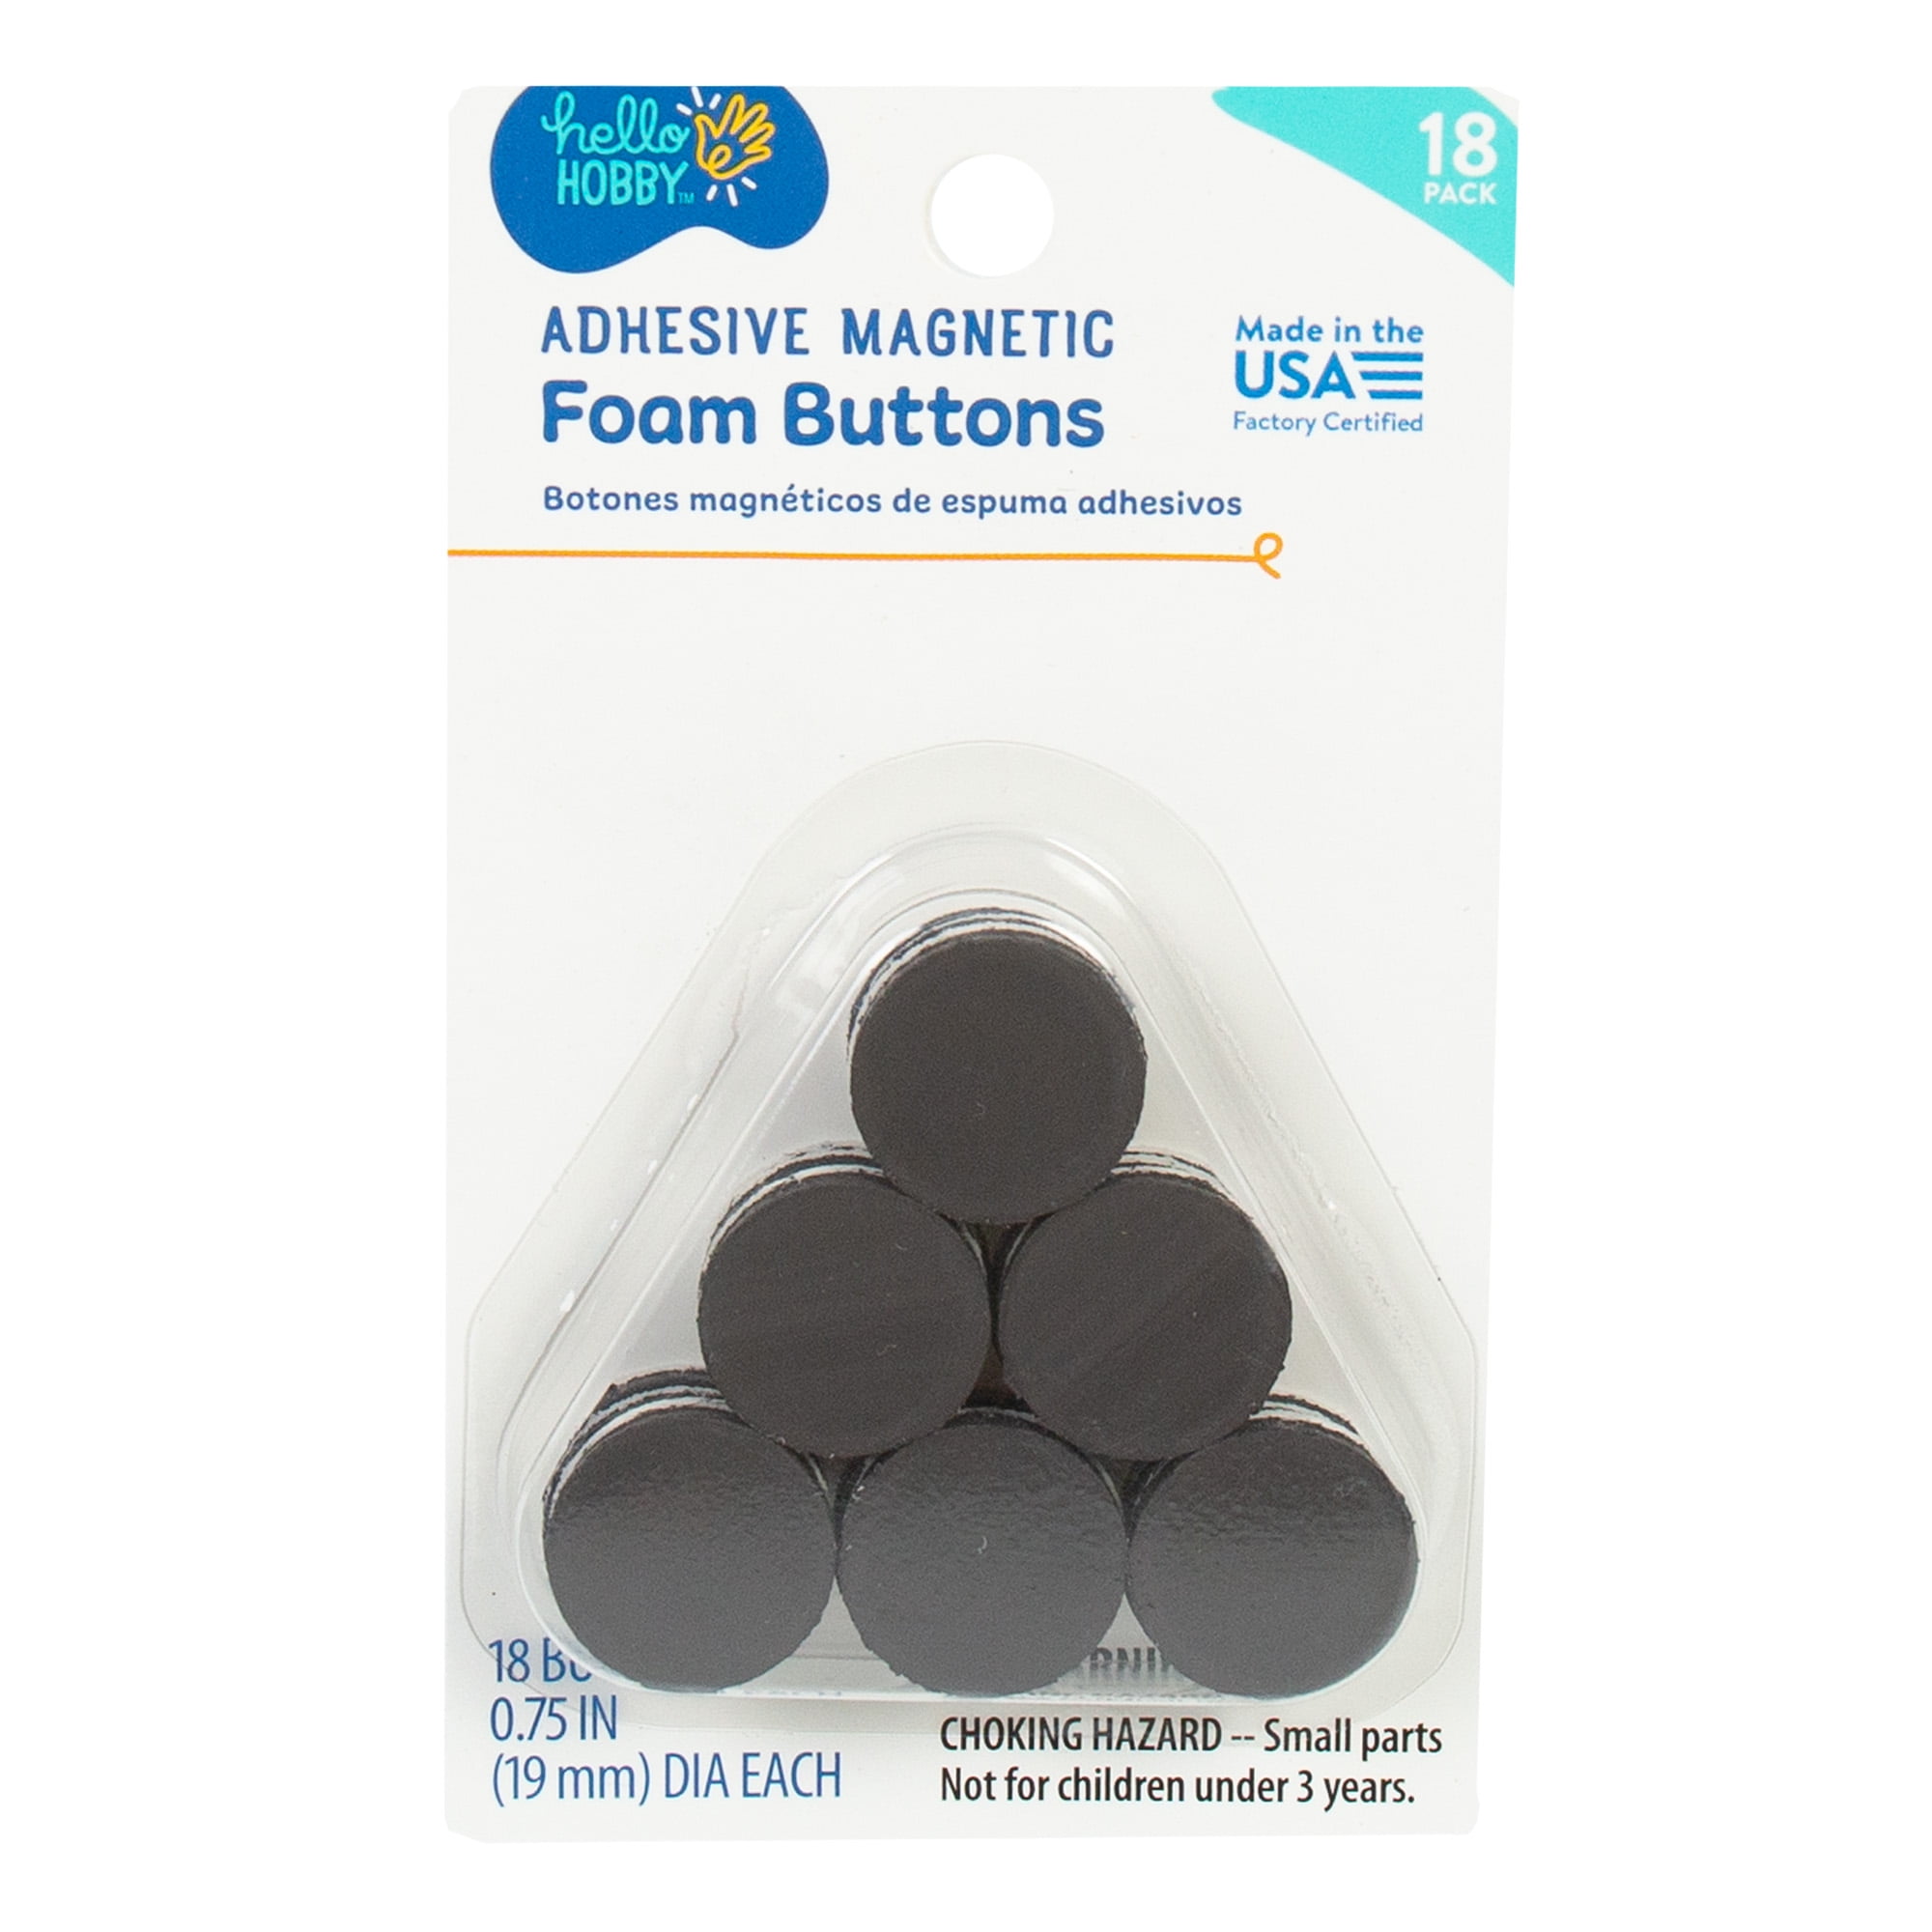 Hello Hobby Black Adhesive Magnetic Foam Buttons, 18-Pack